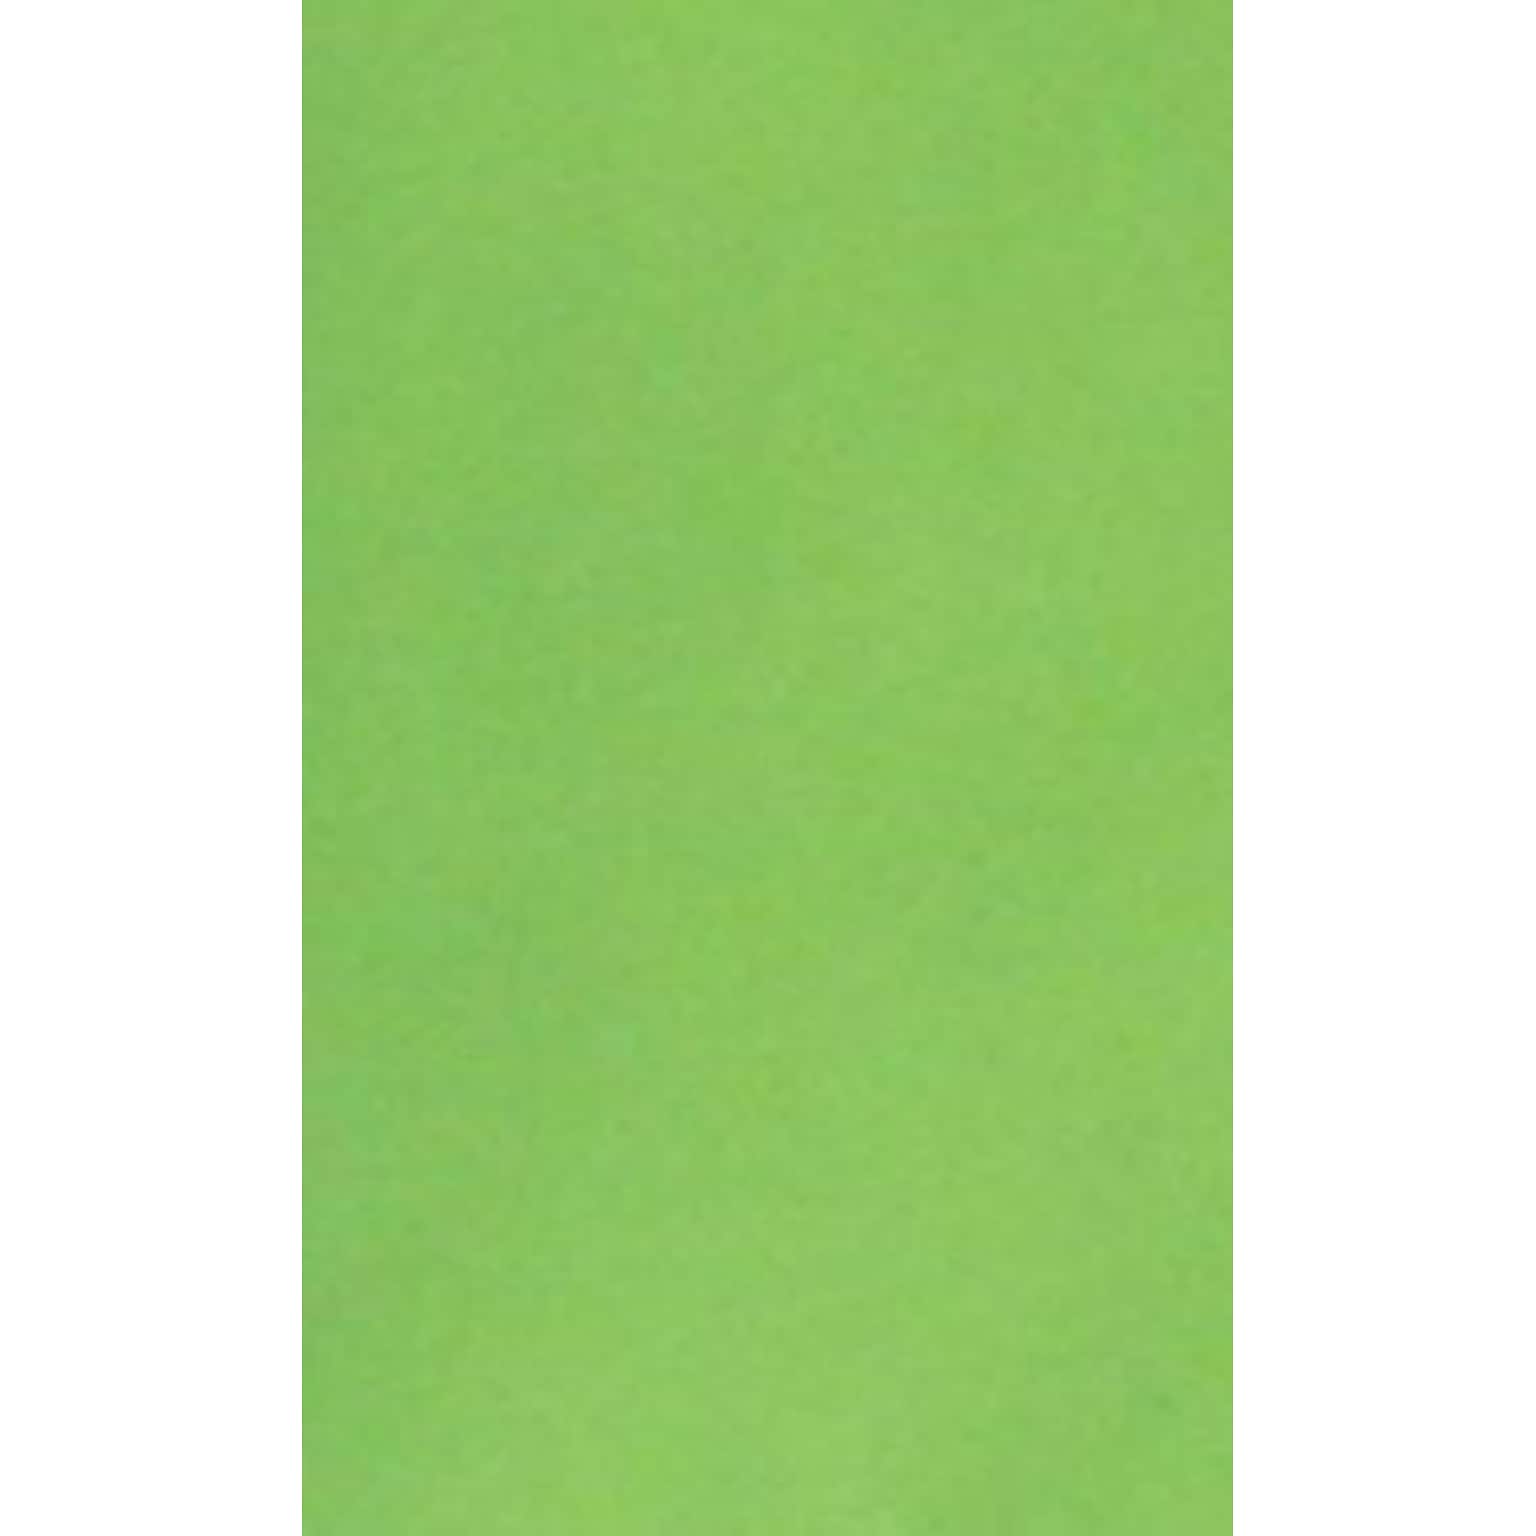 LUX 8.5 x 14 Multipurpose Paper, 32 lbs., Limelight Green, 50 Sheets/Pack (81214-P-101-50)